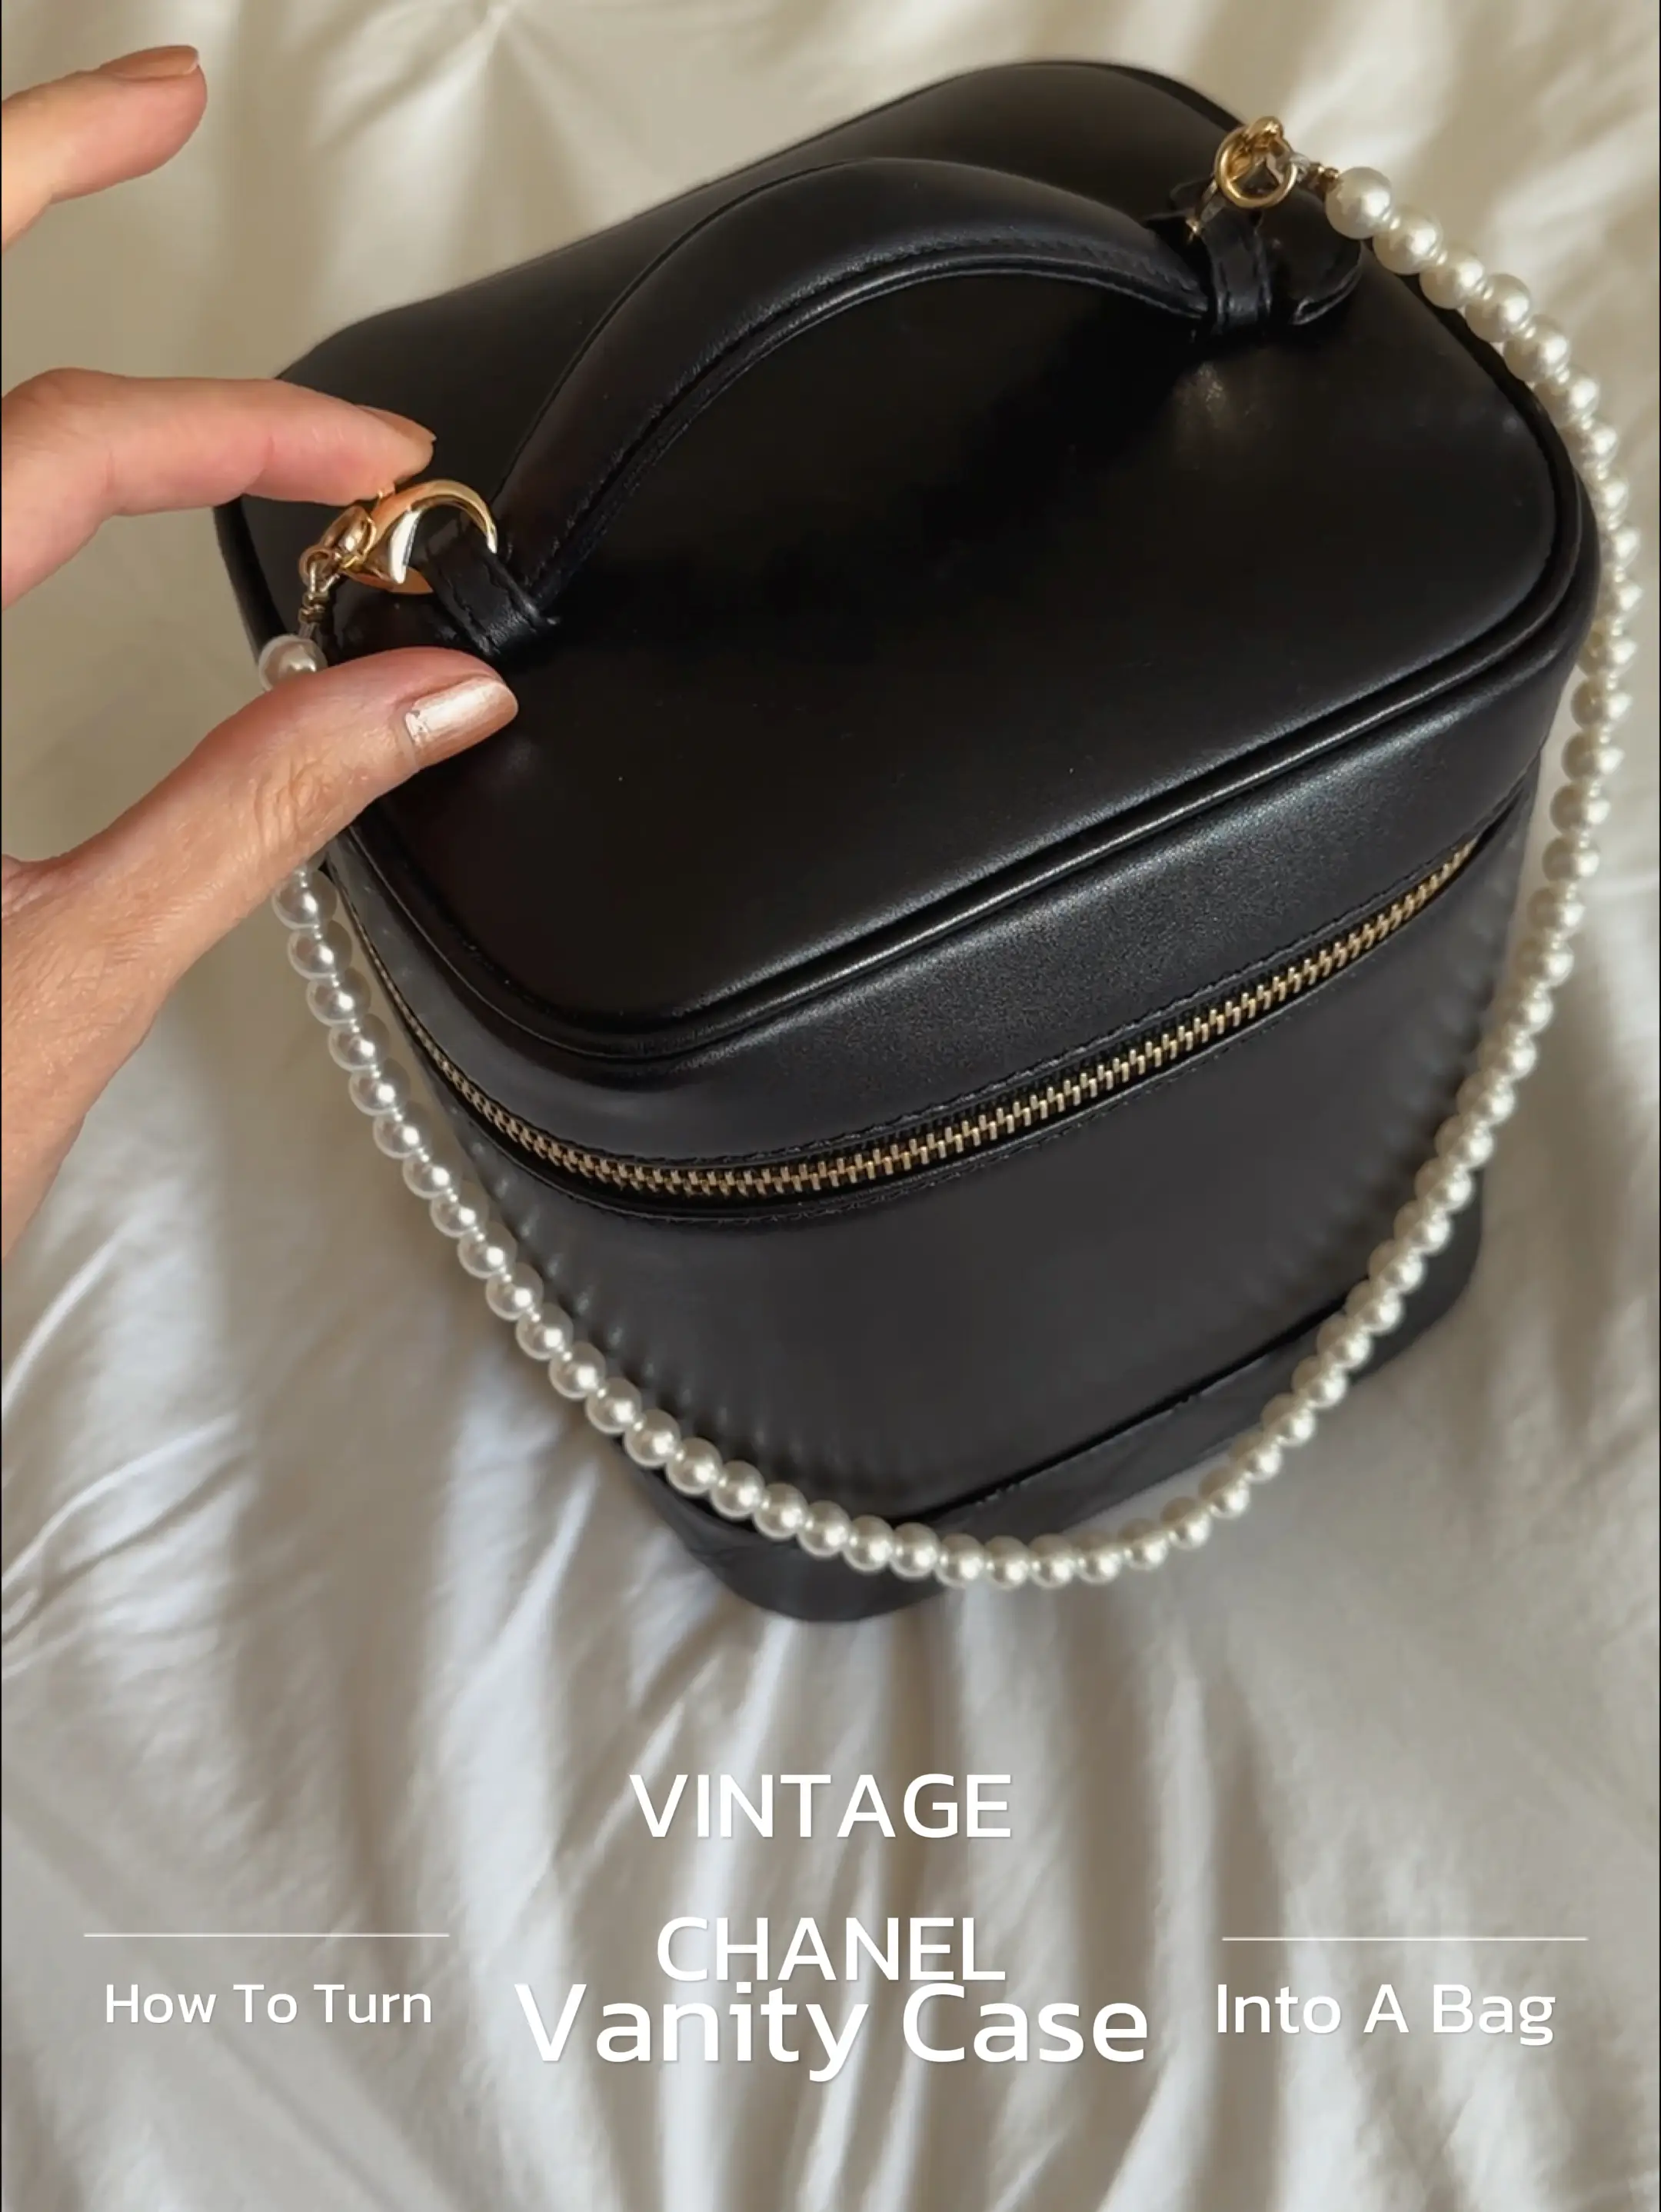 How to turn a vintage Chanel vanity case into a handbag with shoulder